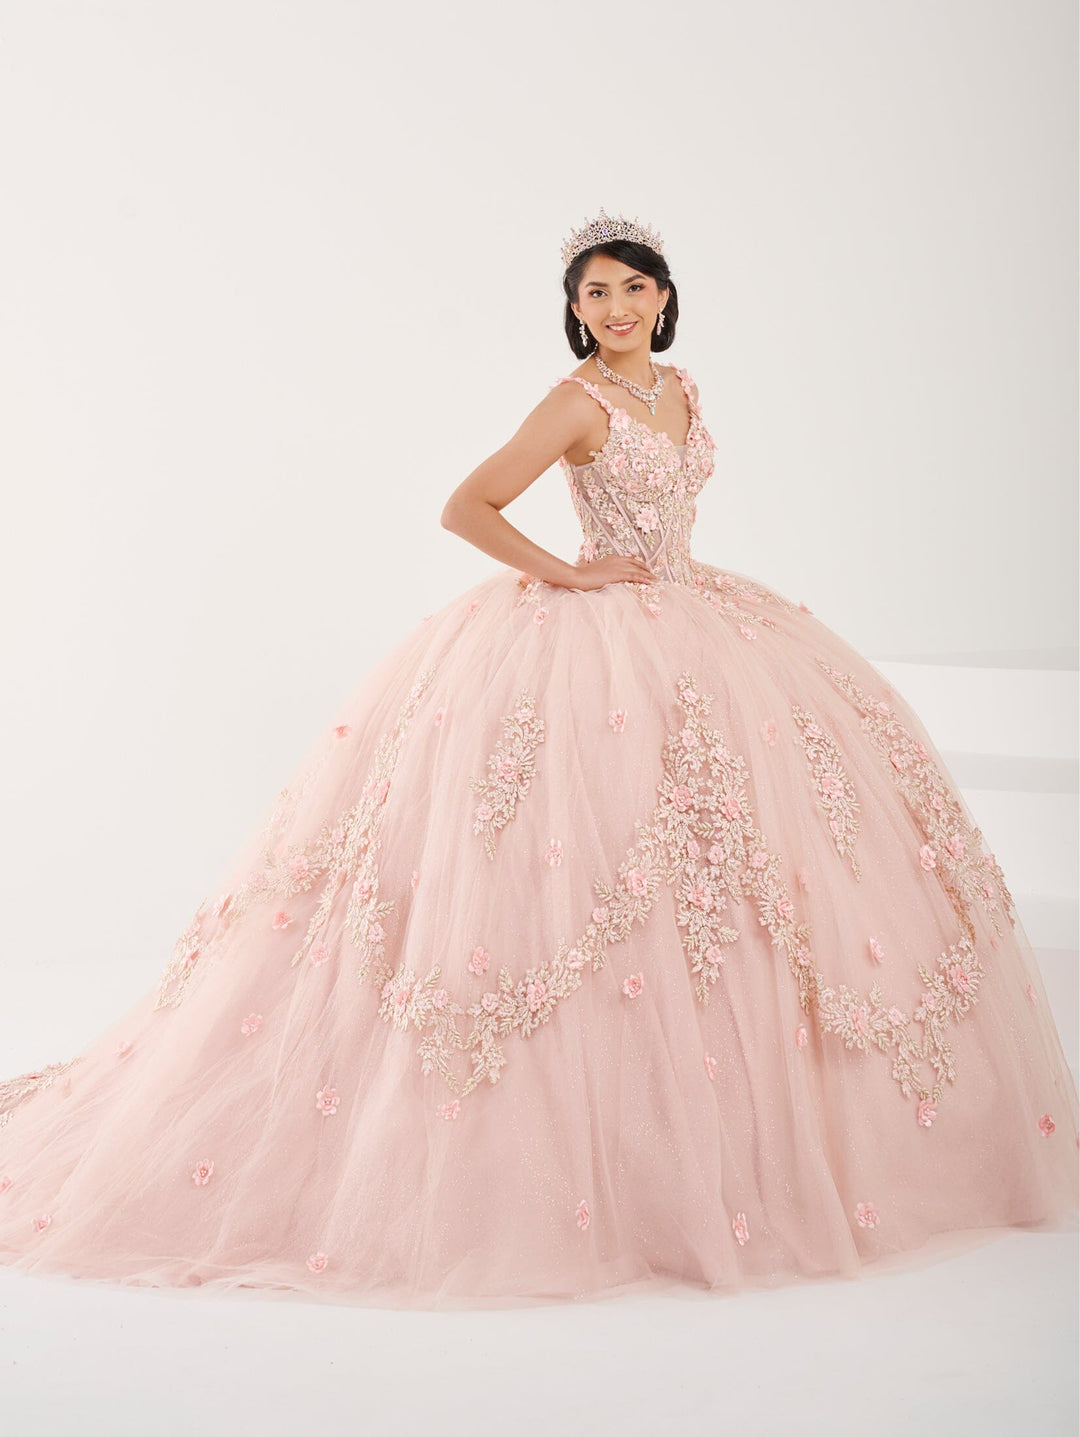 3D Floral Cape Quinceanera Dress by Fiesta Gowns 56498